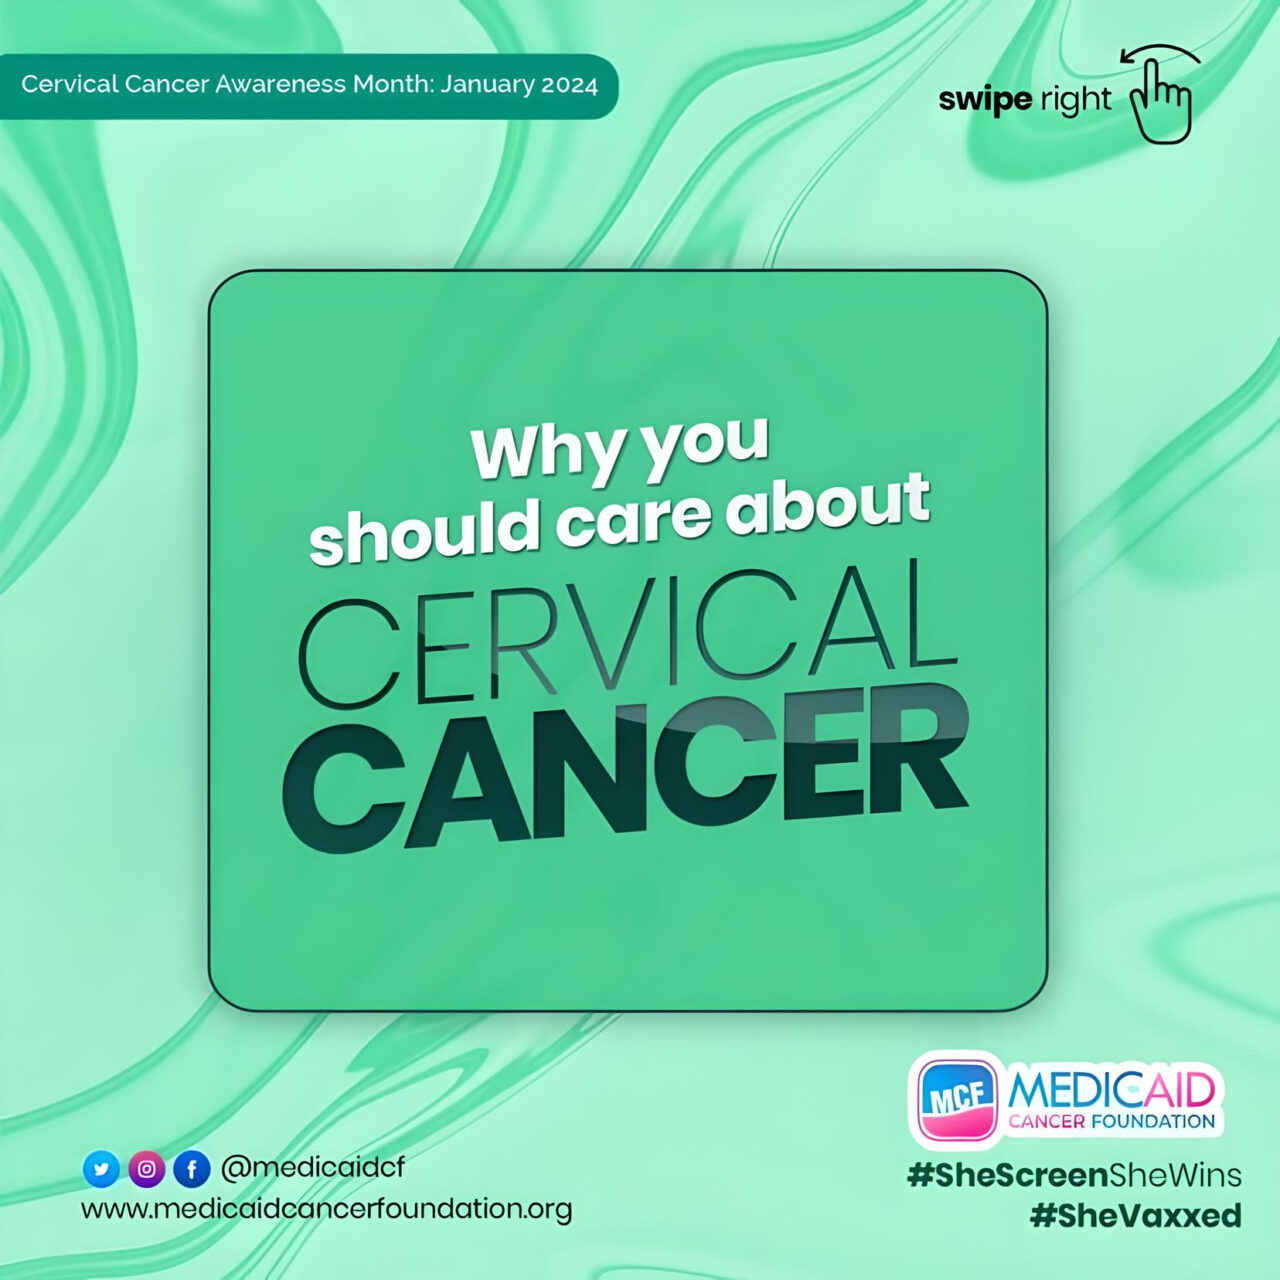 Cervical cancer is a silent threat, but awareness is a powerful shield – Medicaid Cancer Foundation